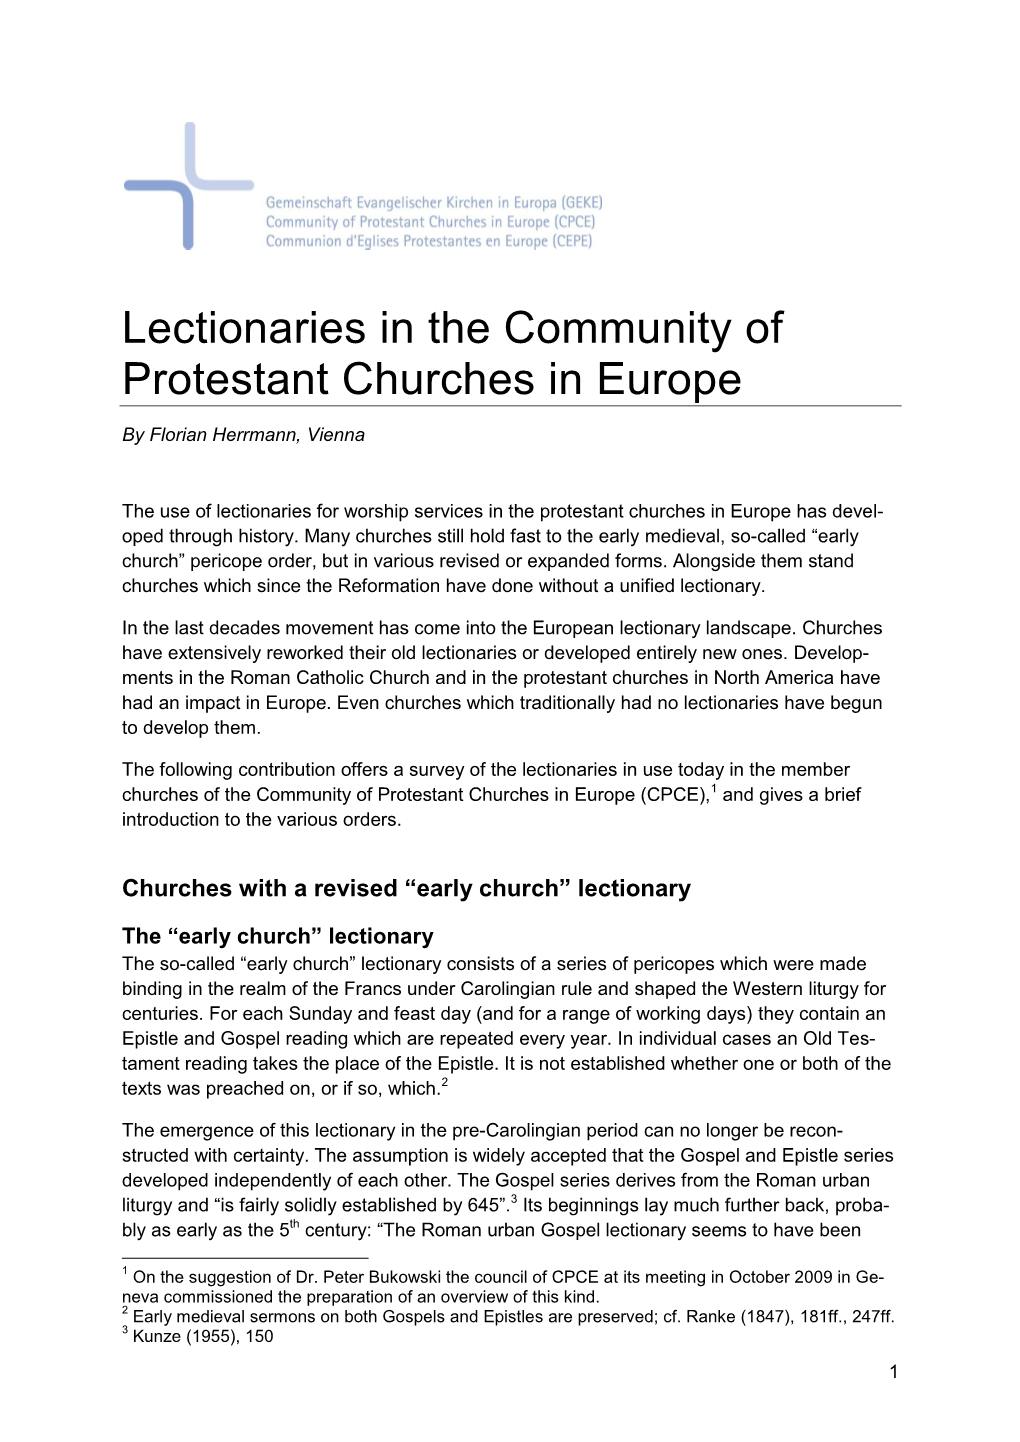 Lectionaries in the Community of Protestant Churches in Europe